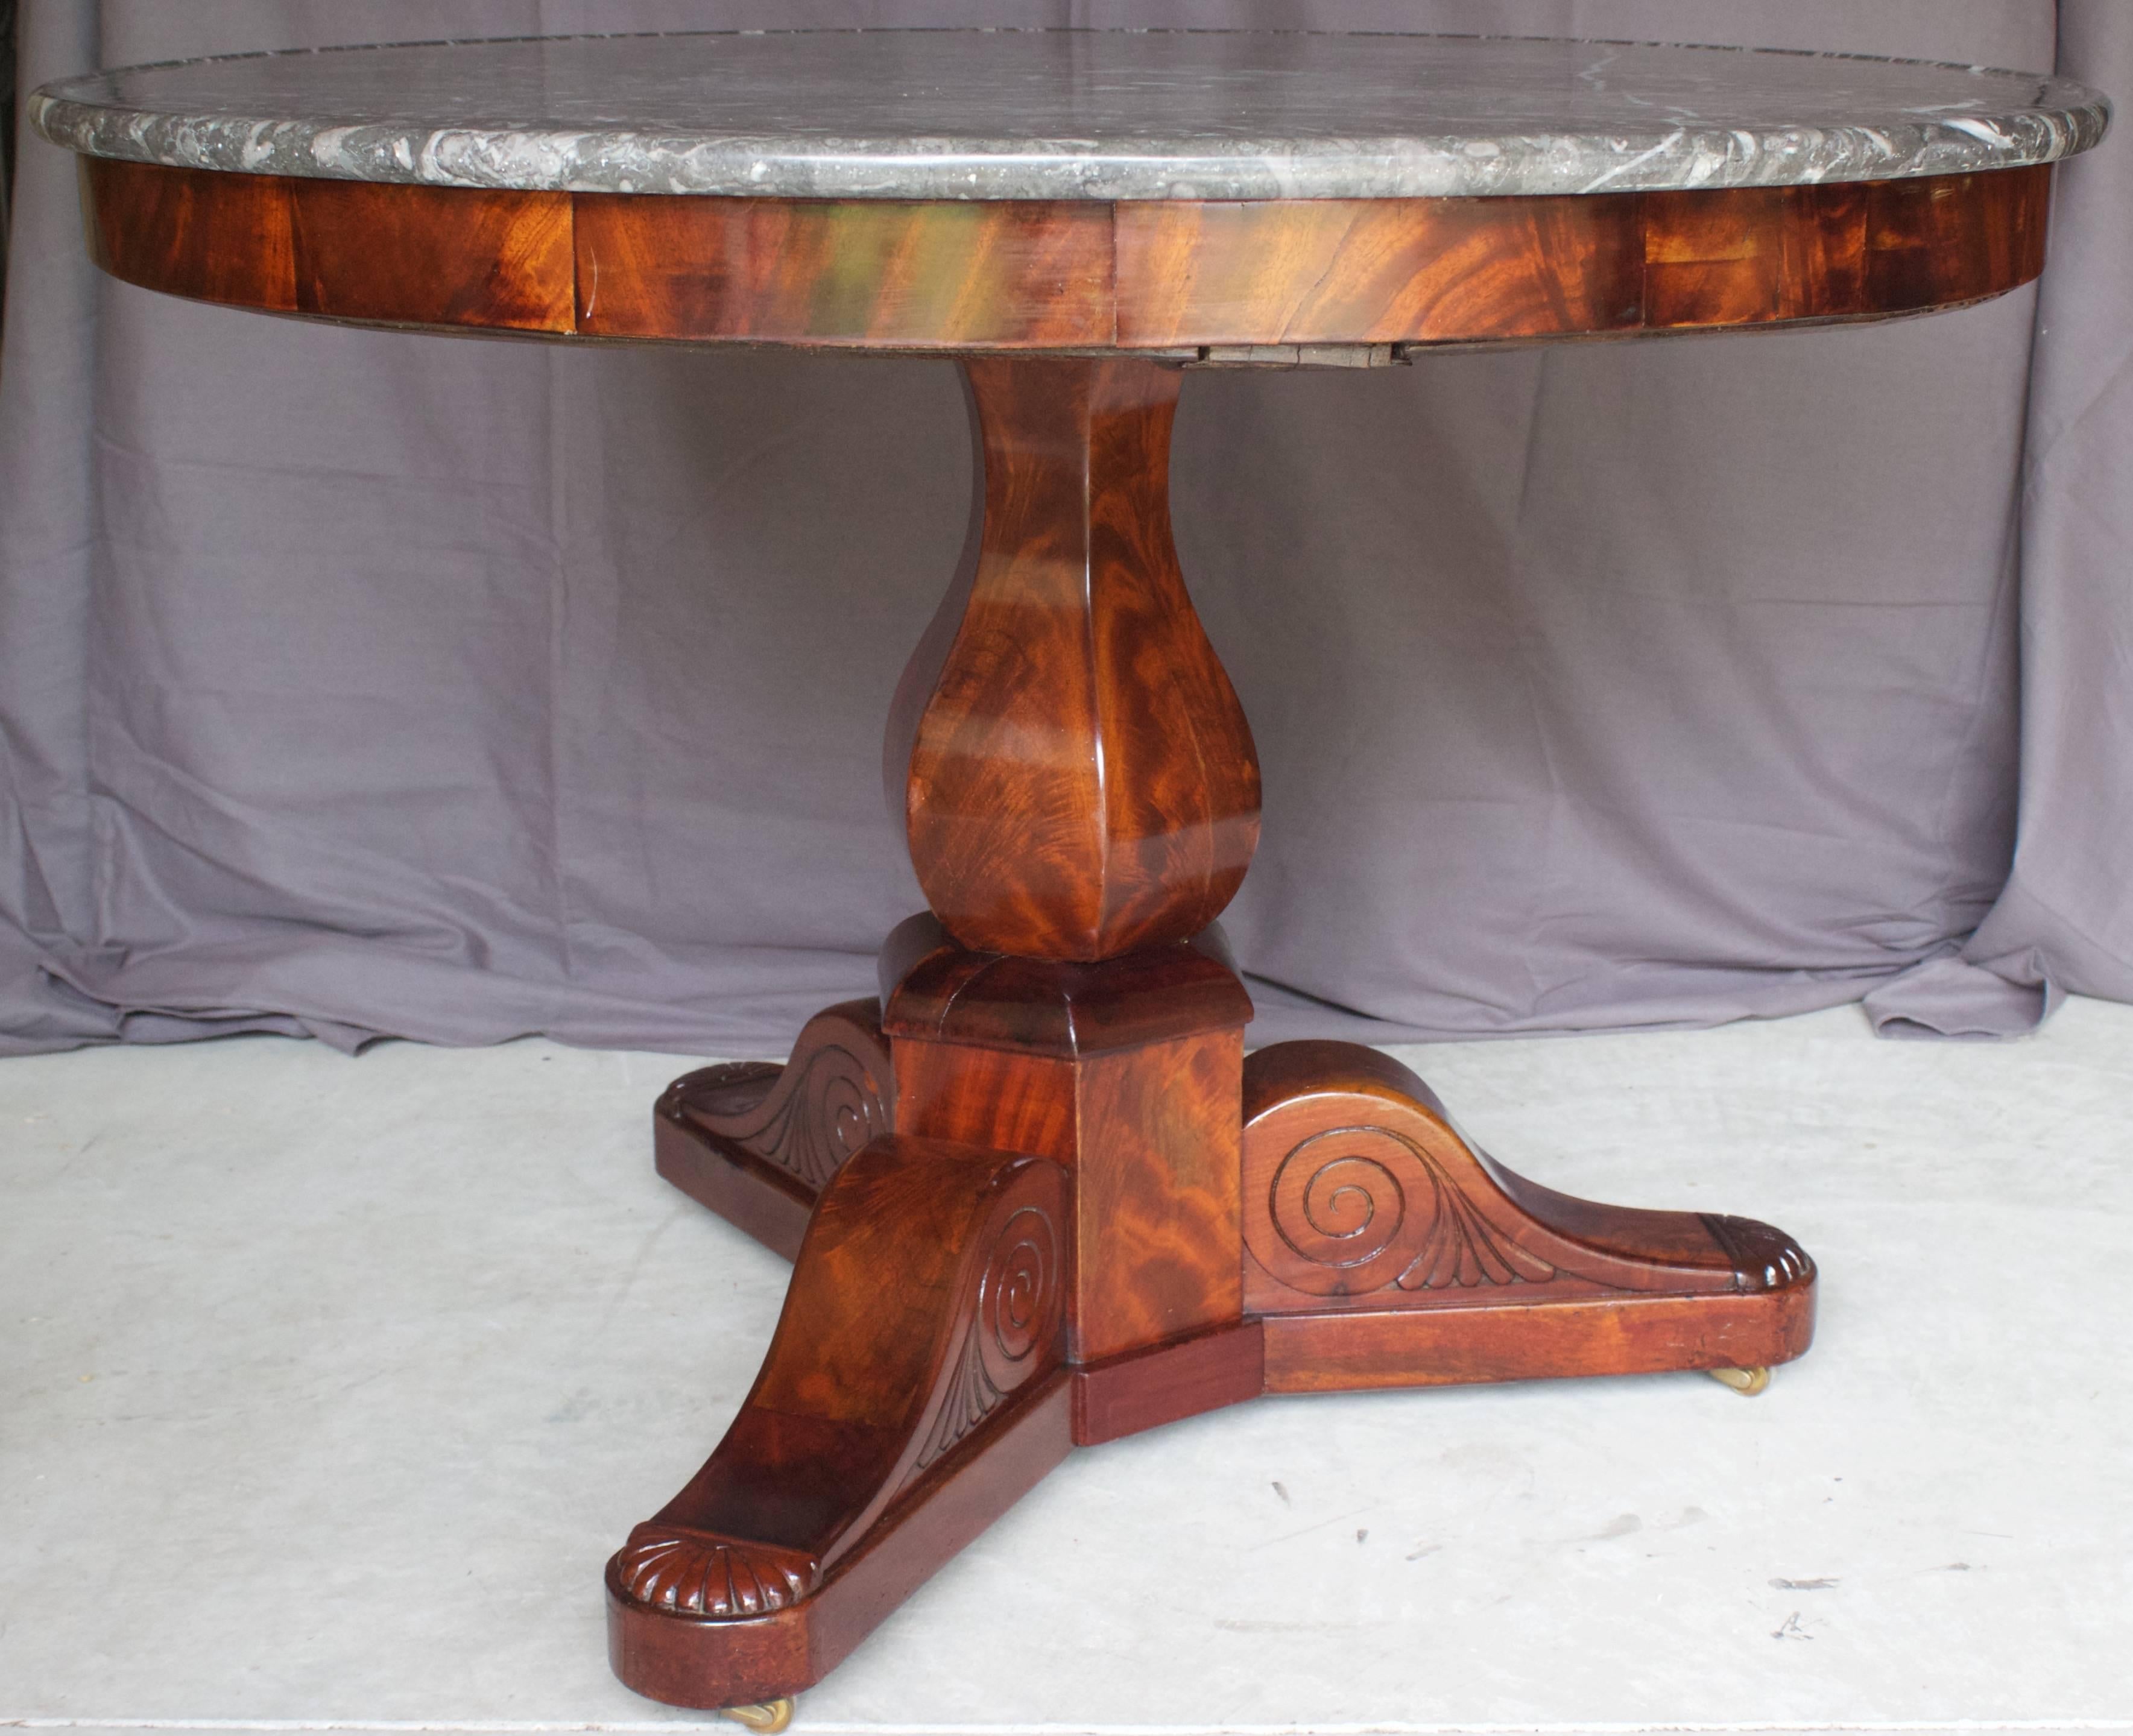 Nice mahogany gueridon made during the Restauration period (1815-1830) with a six sided baluster shaft supported by smoothed tripod feet on original castors. The top is a Sainte-Anne grey marble “à cuvette”.
Very good condition.